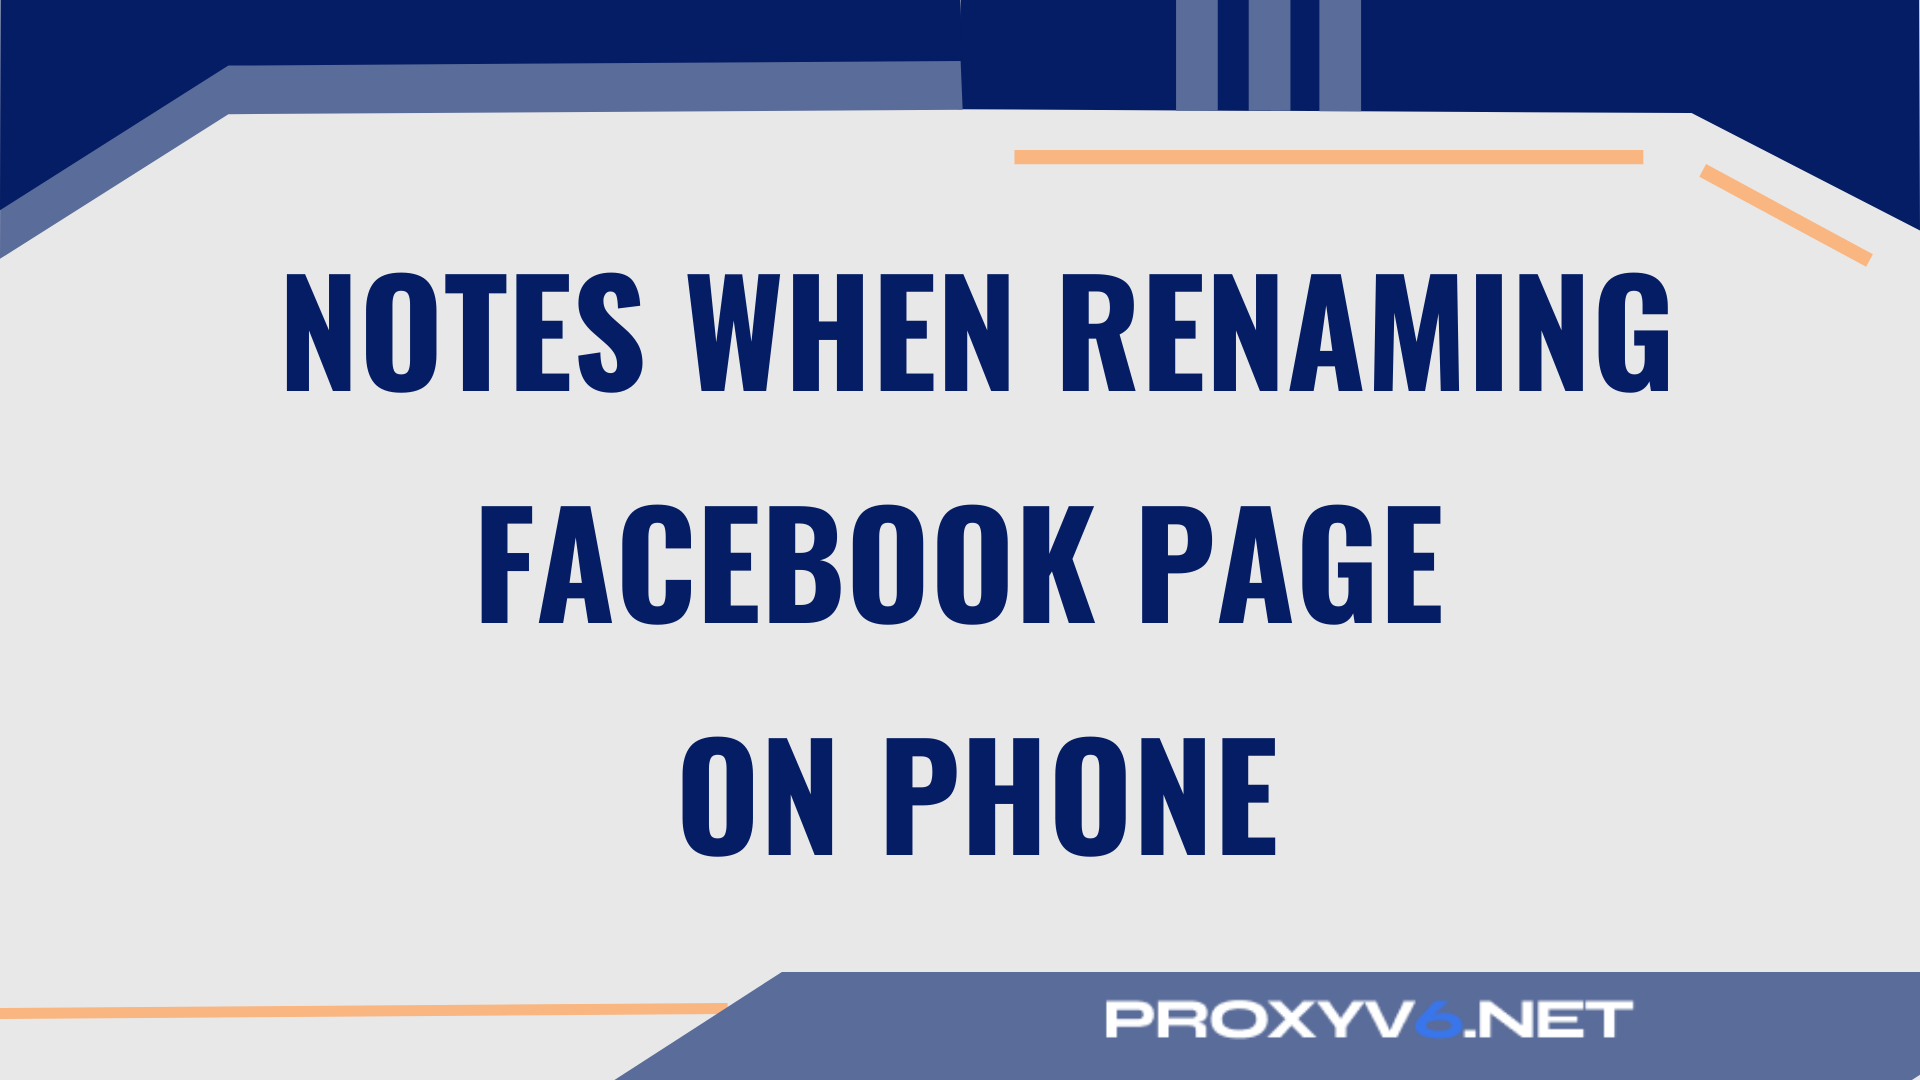 Notes when renaming Facebook Page on phone